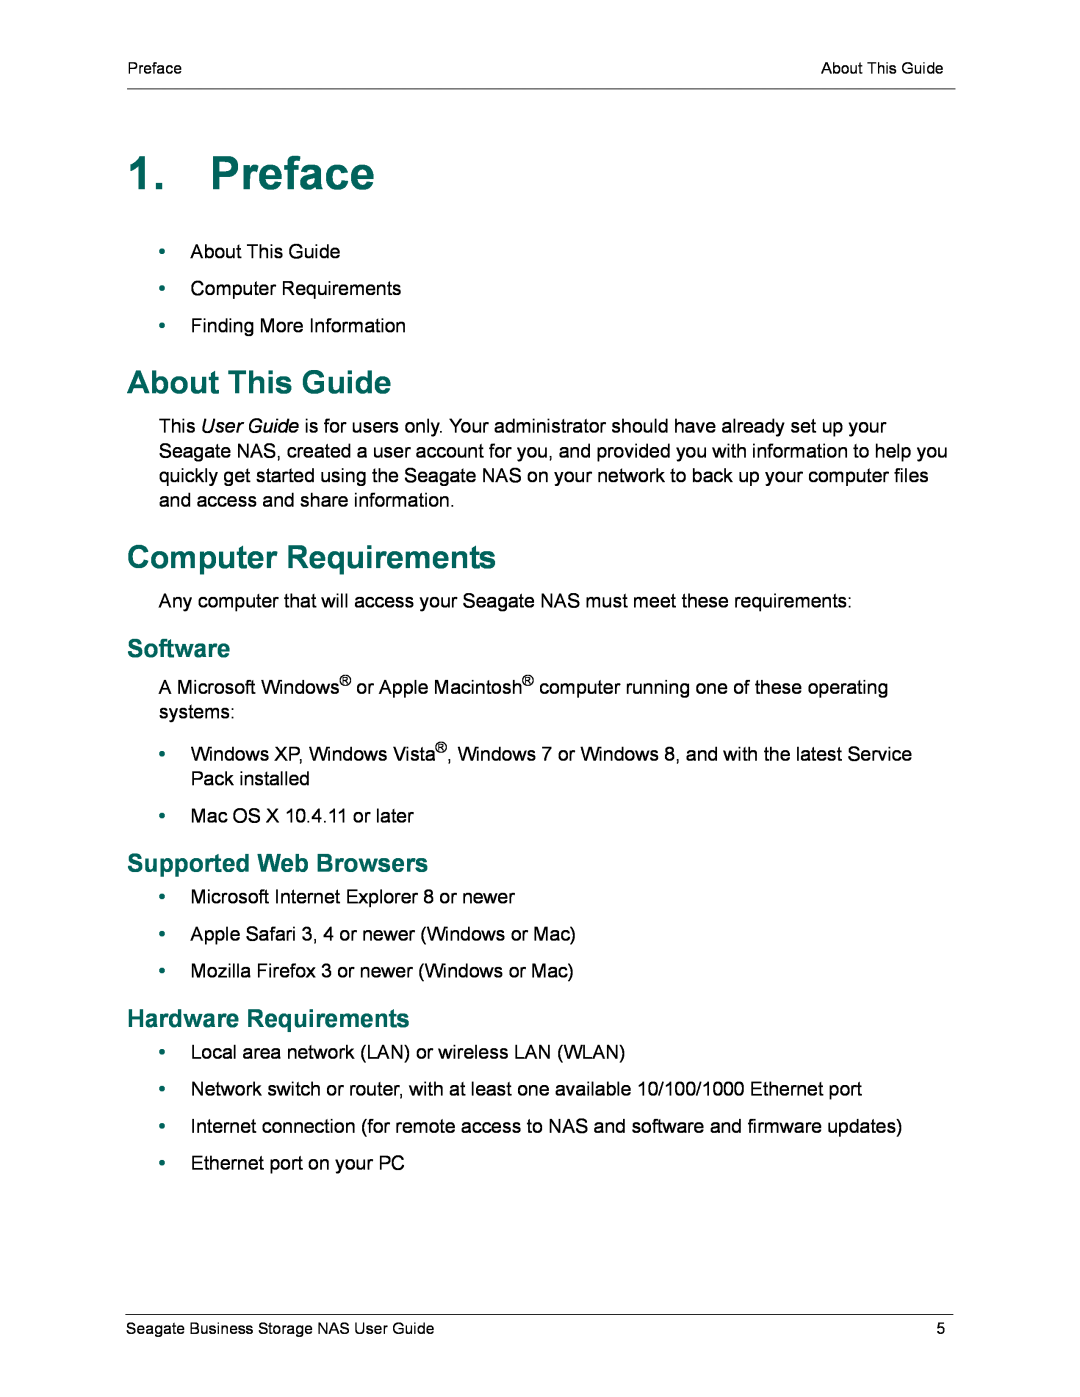 Seagate STBP100 Preface, About This Guide, Computer Requirements, Software, Supported Web Browsers, Hardware Requirements 